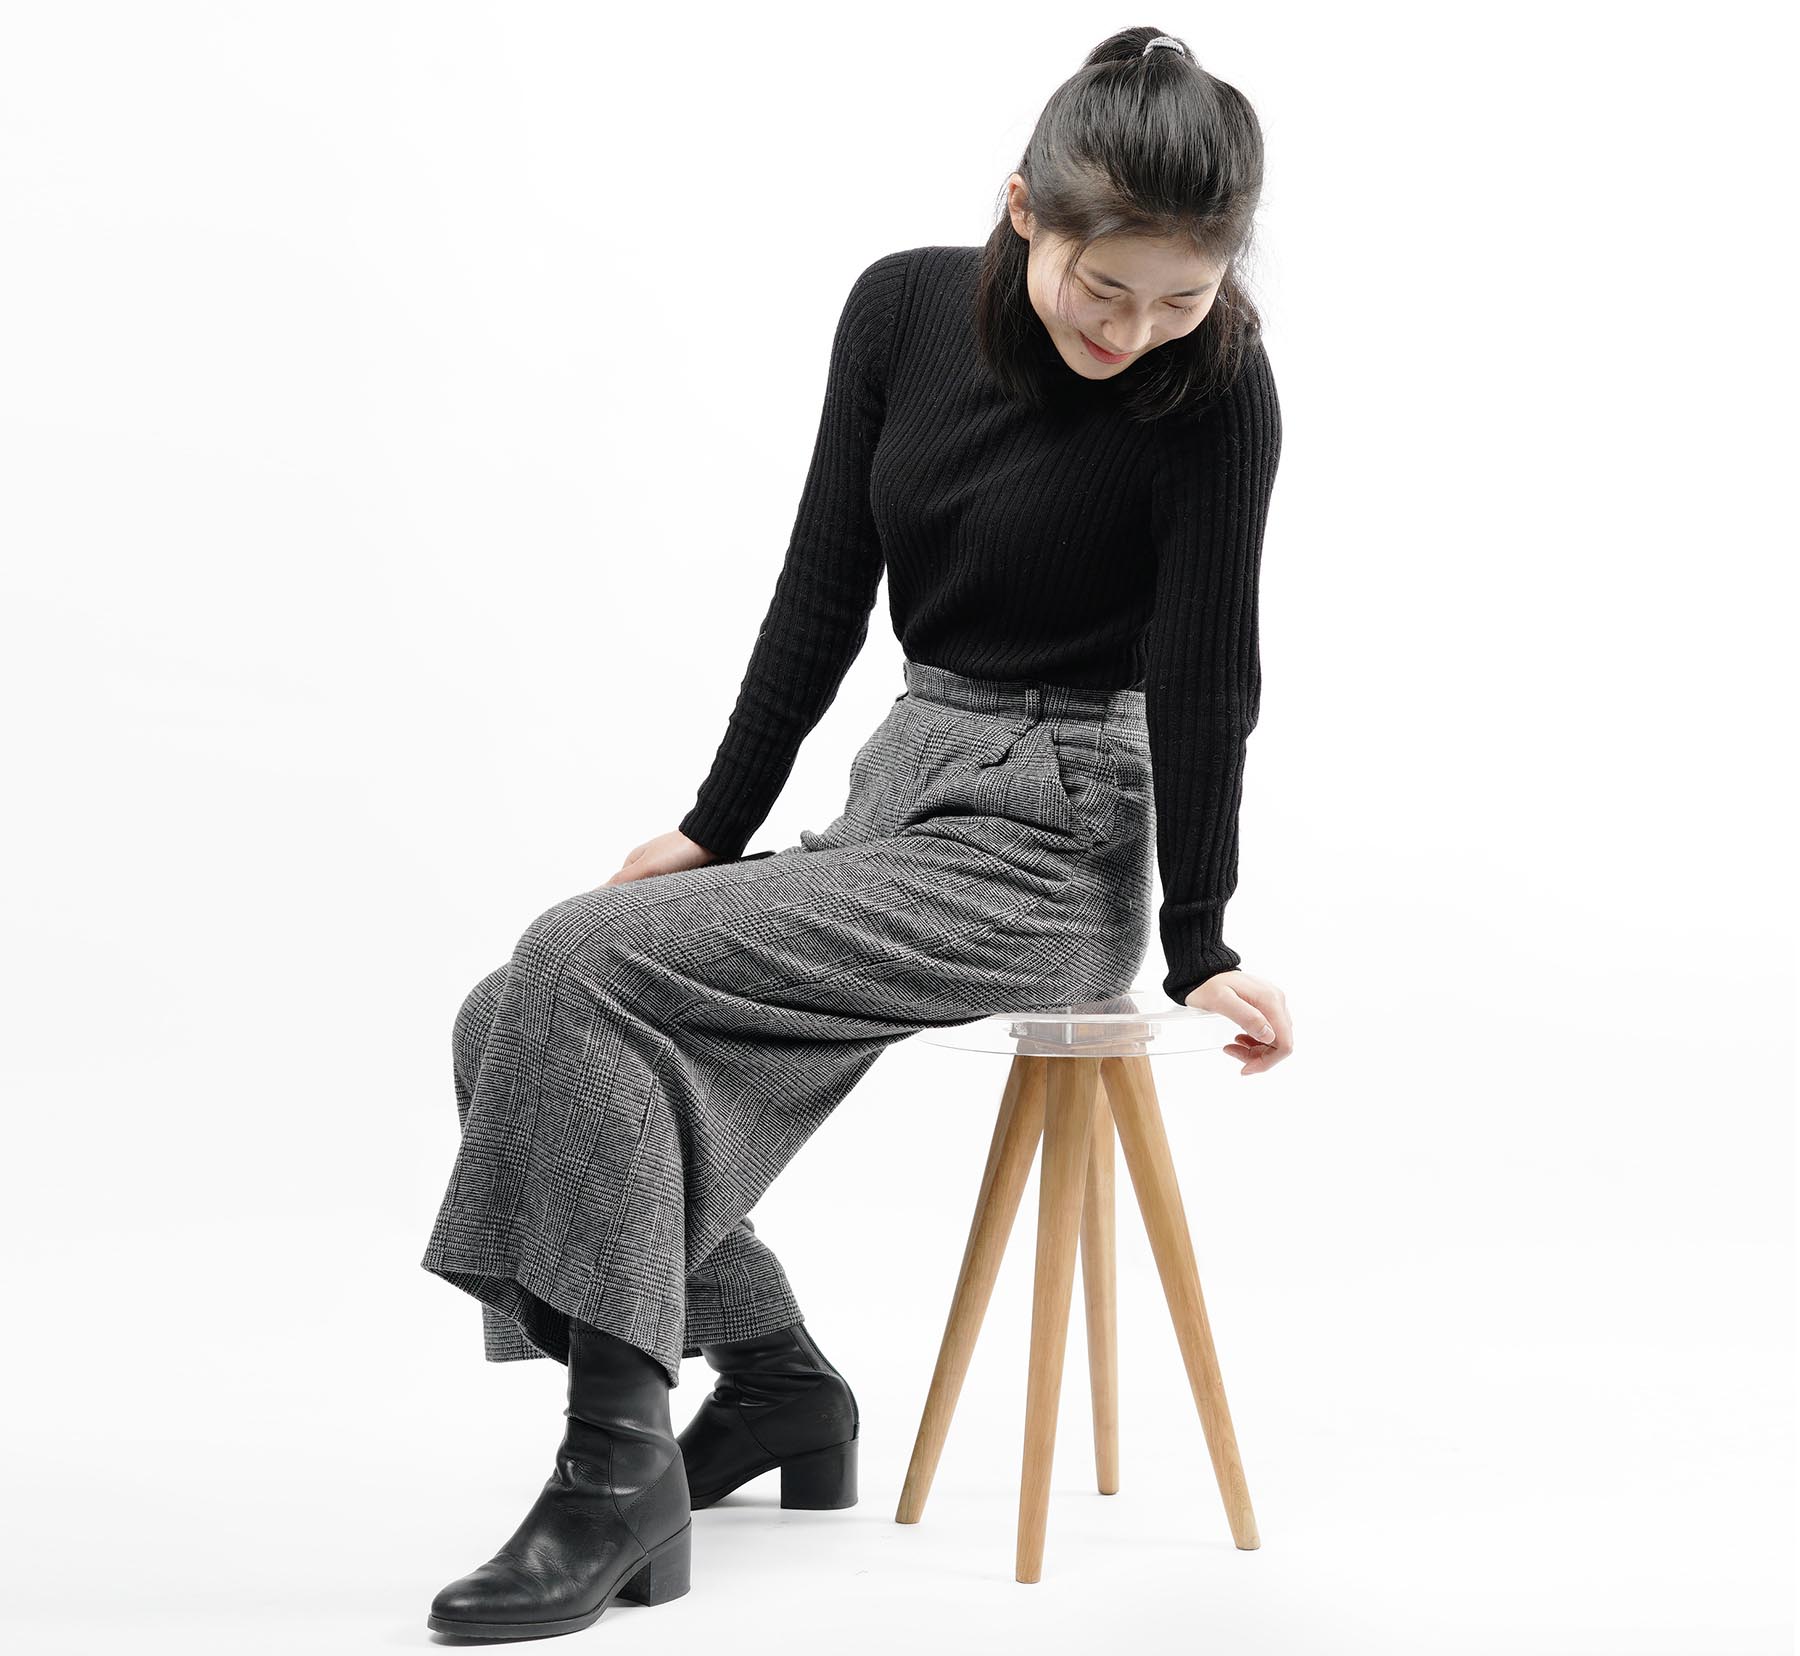 Square and Round A Multifunctional Stool by Xu Le